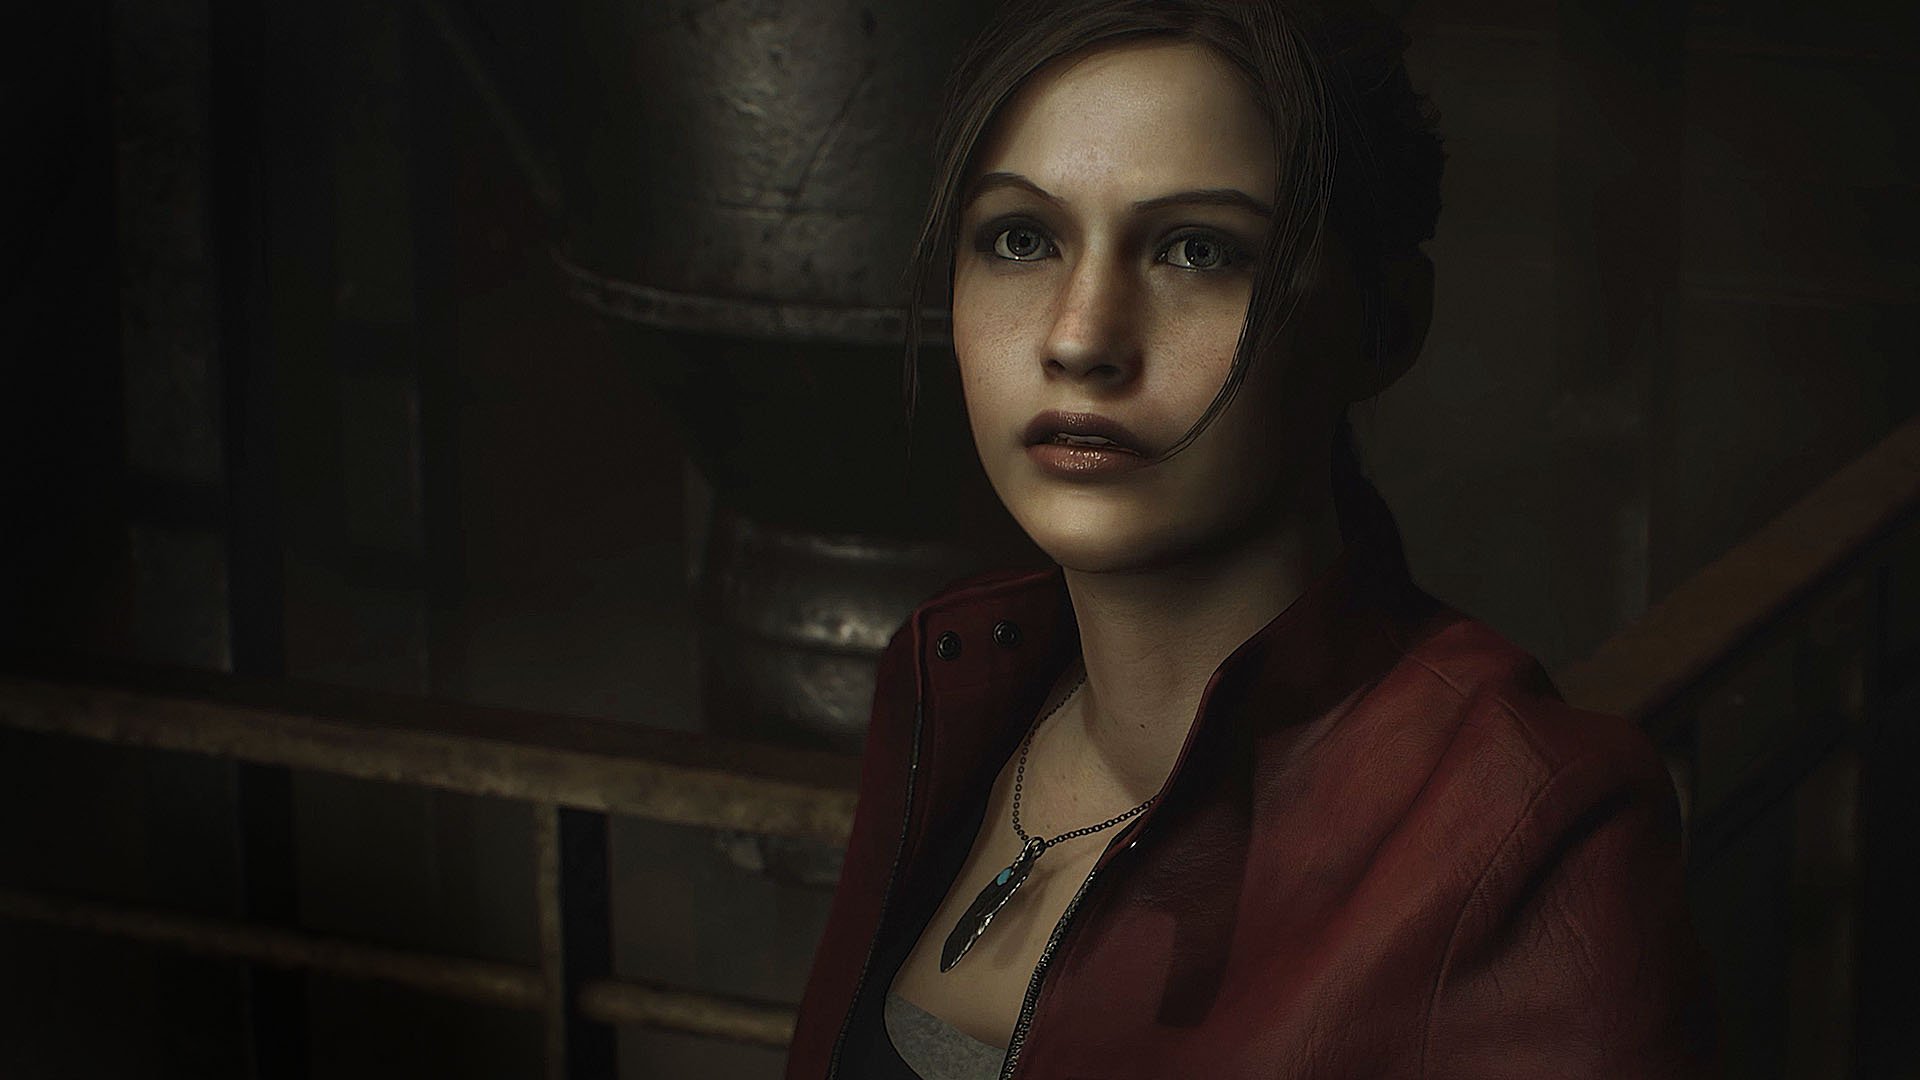 Resident Evil 2 Remake New Screenshots Showcase Claire Redfield